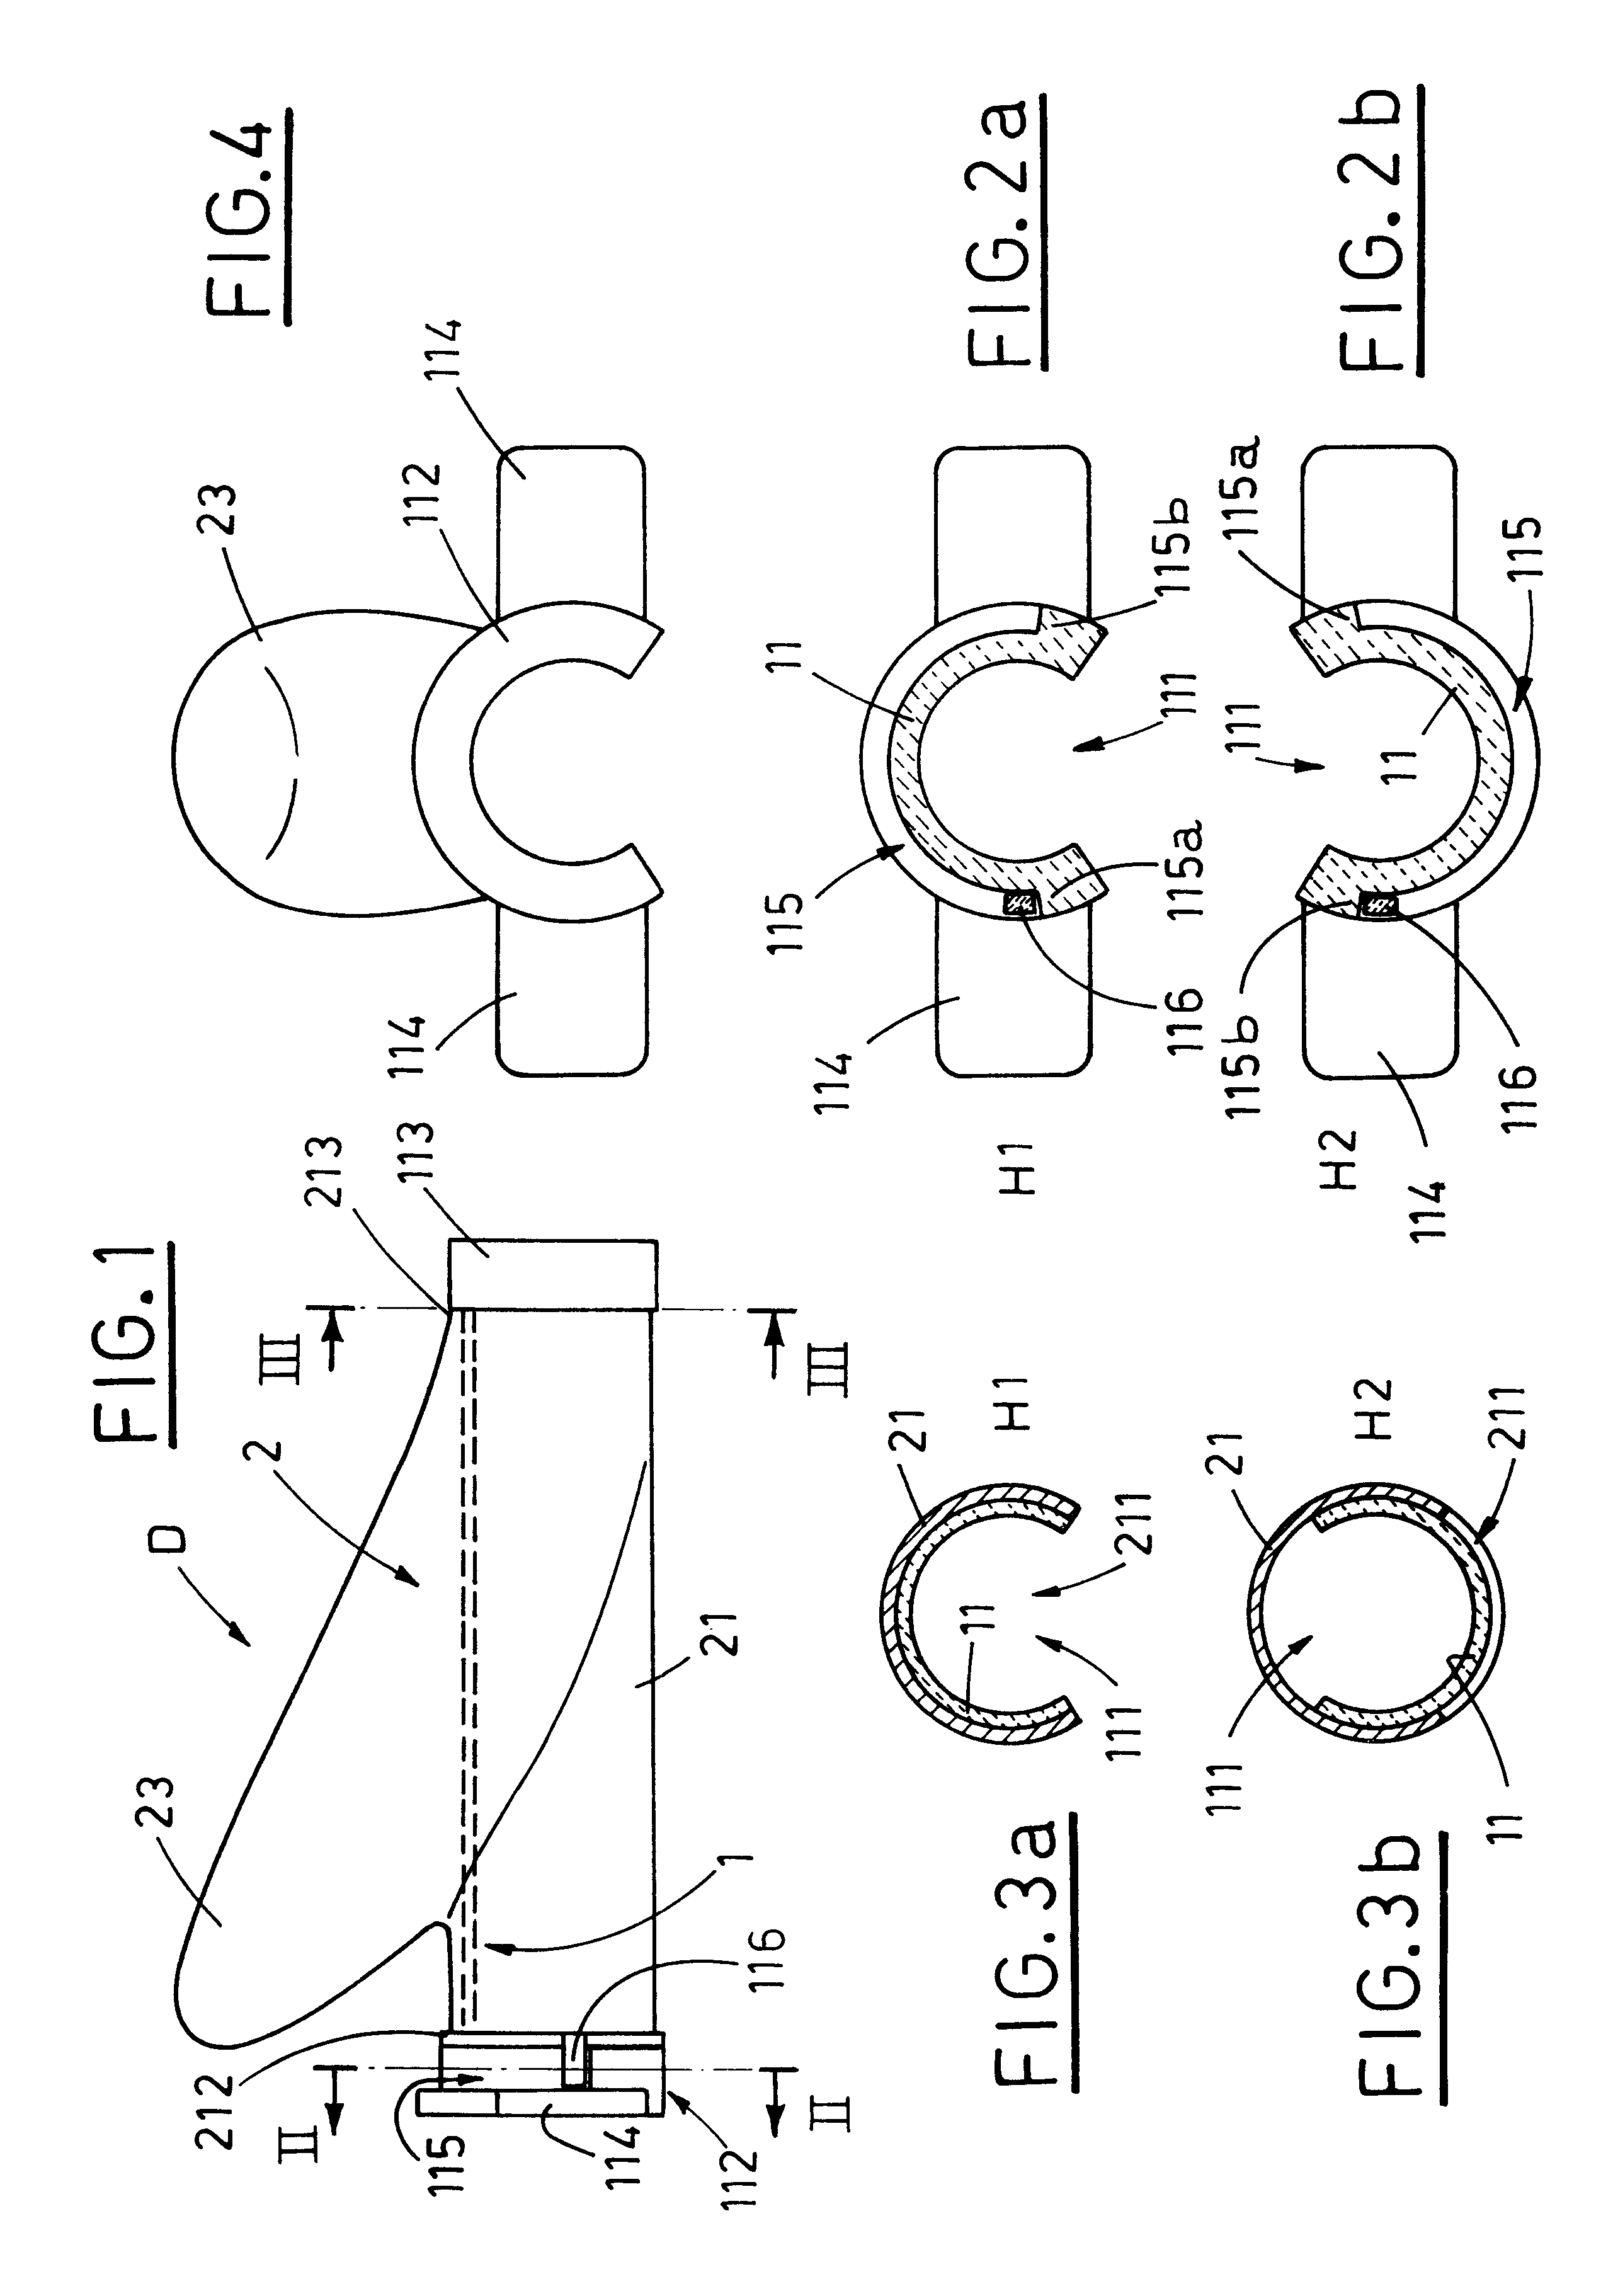 Device for inserting wires and/or pipes in a tubular, flexible sheath provided with openable overlapping edges